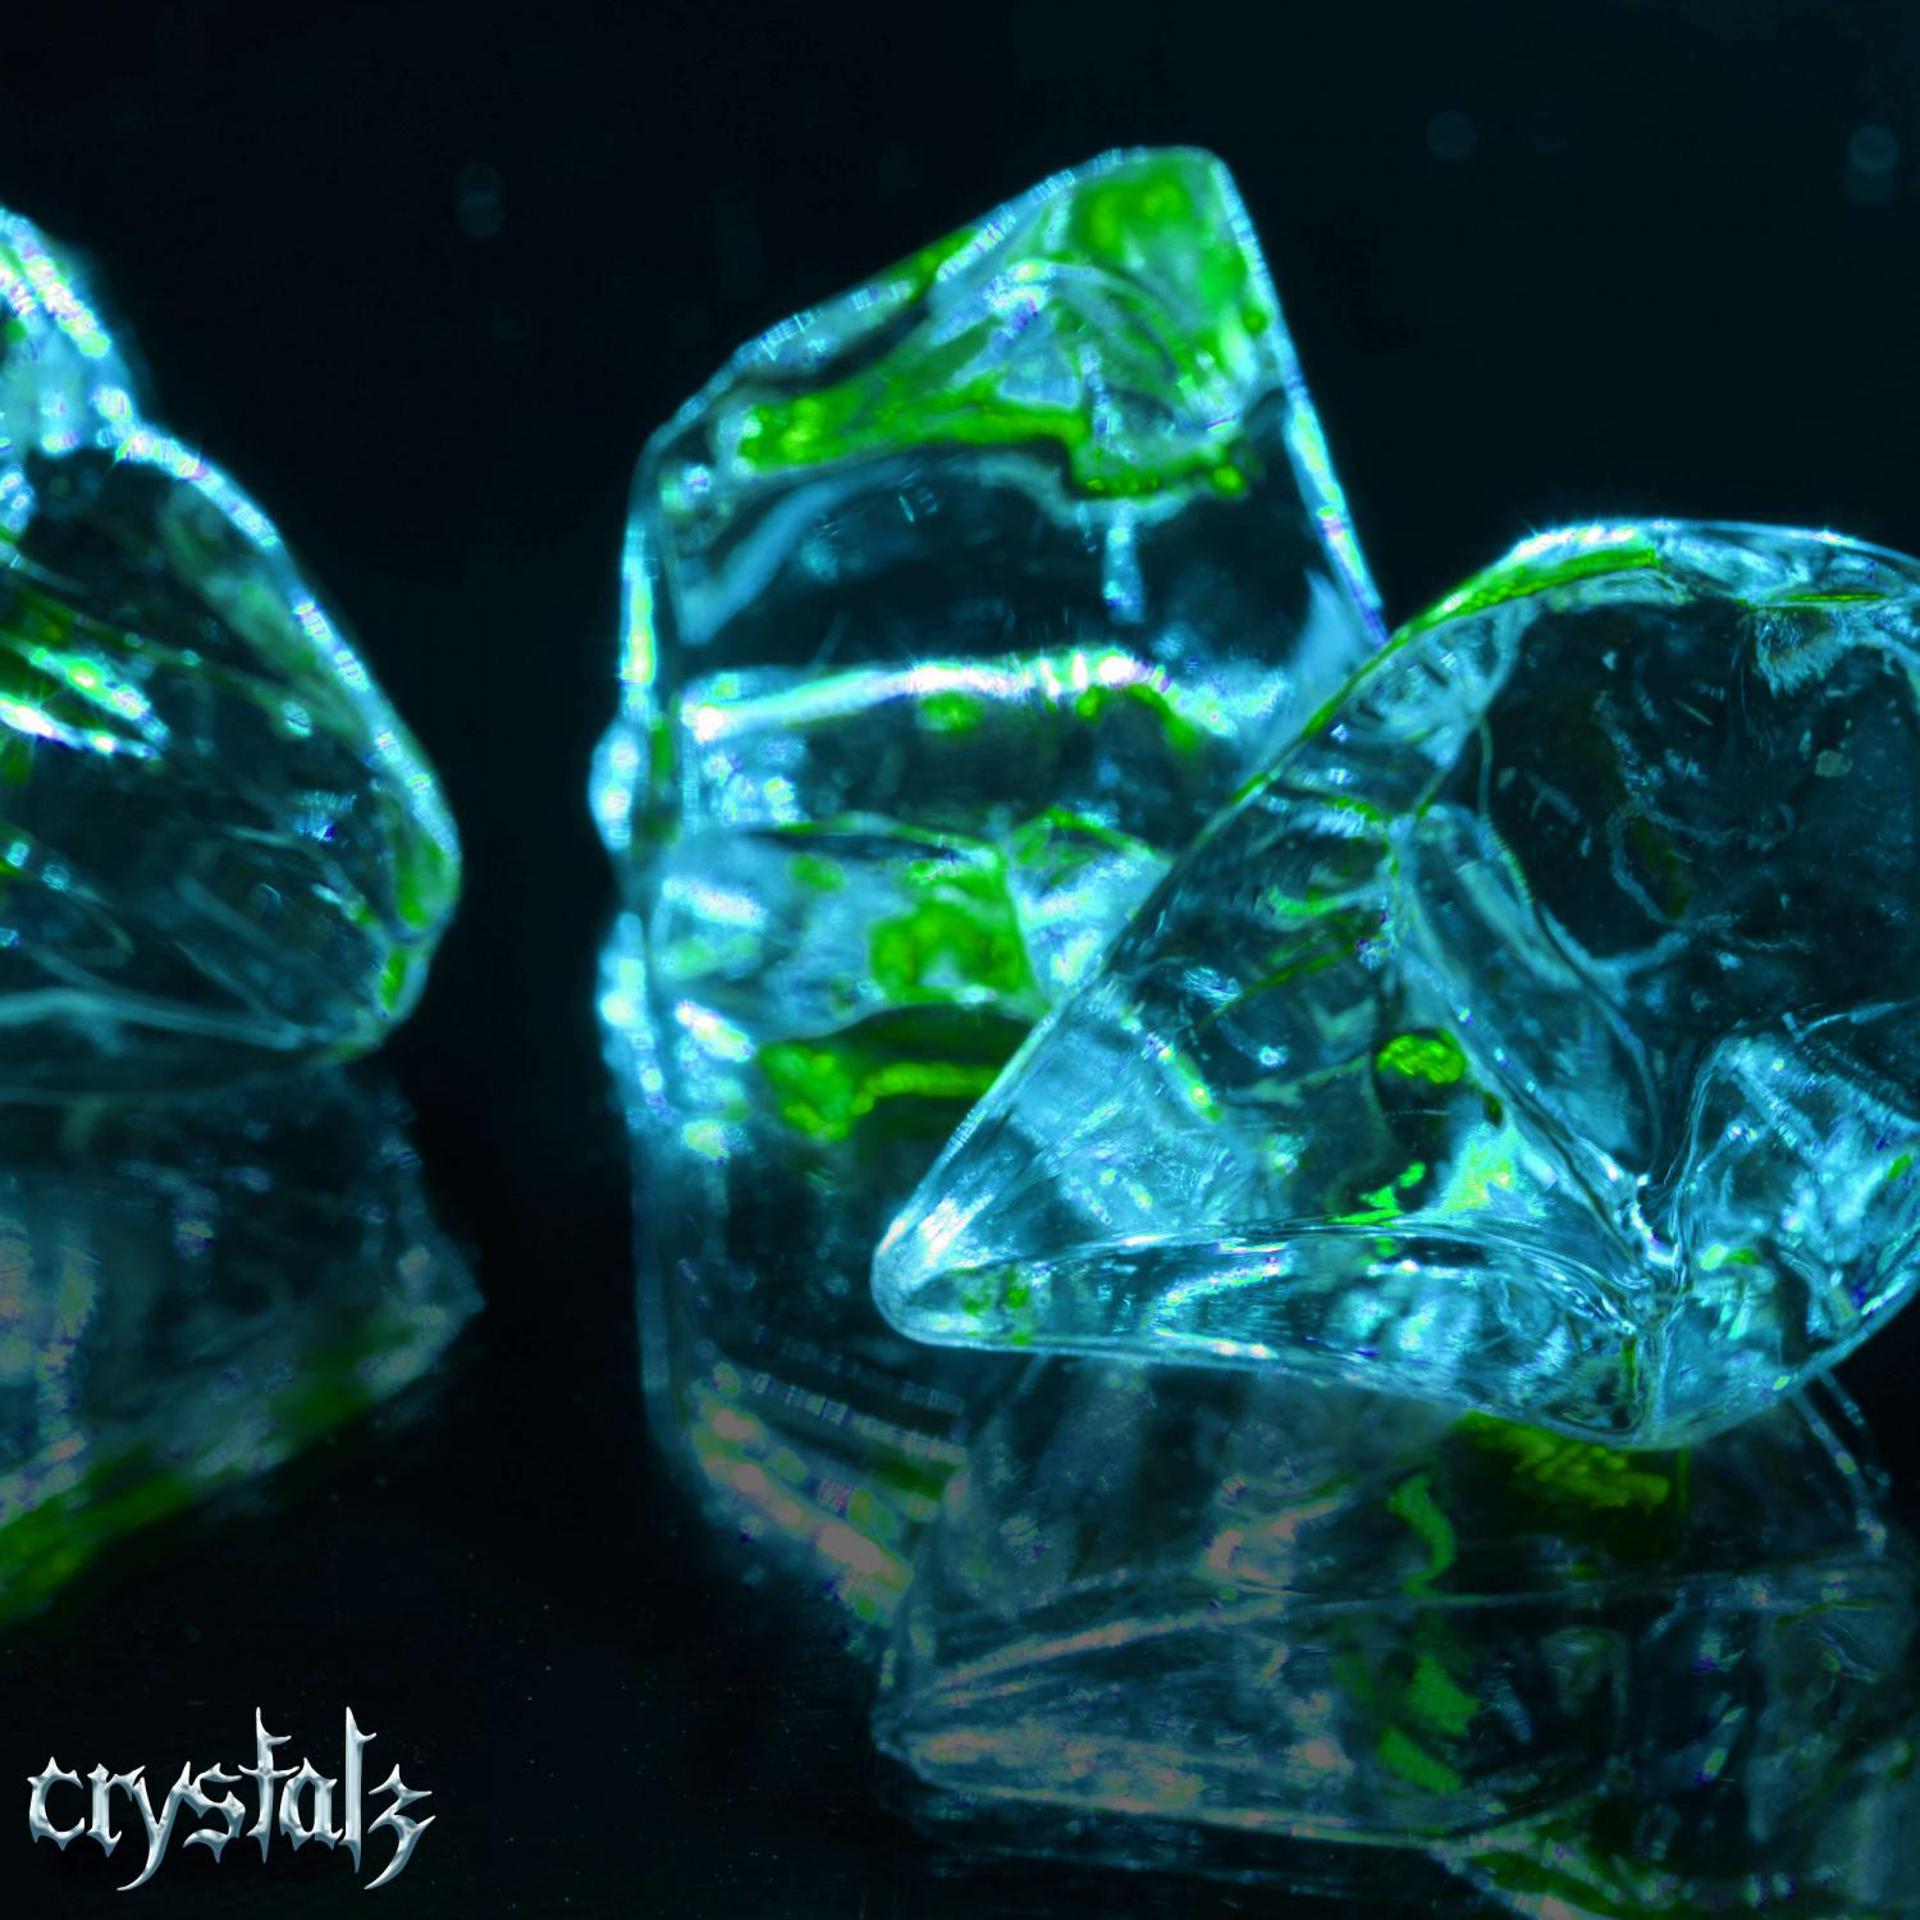 Crystals exe speed up. Crystals isolate ФОНК. Crystals isolate.exe. Phonk - Crystal - isolate. Crystals pr1svx.